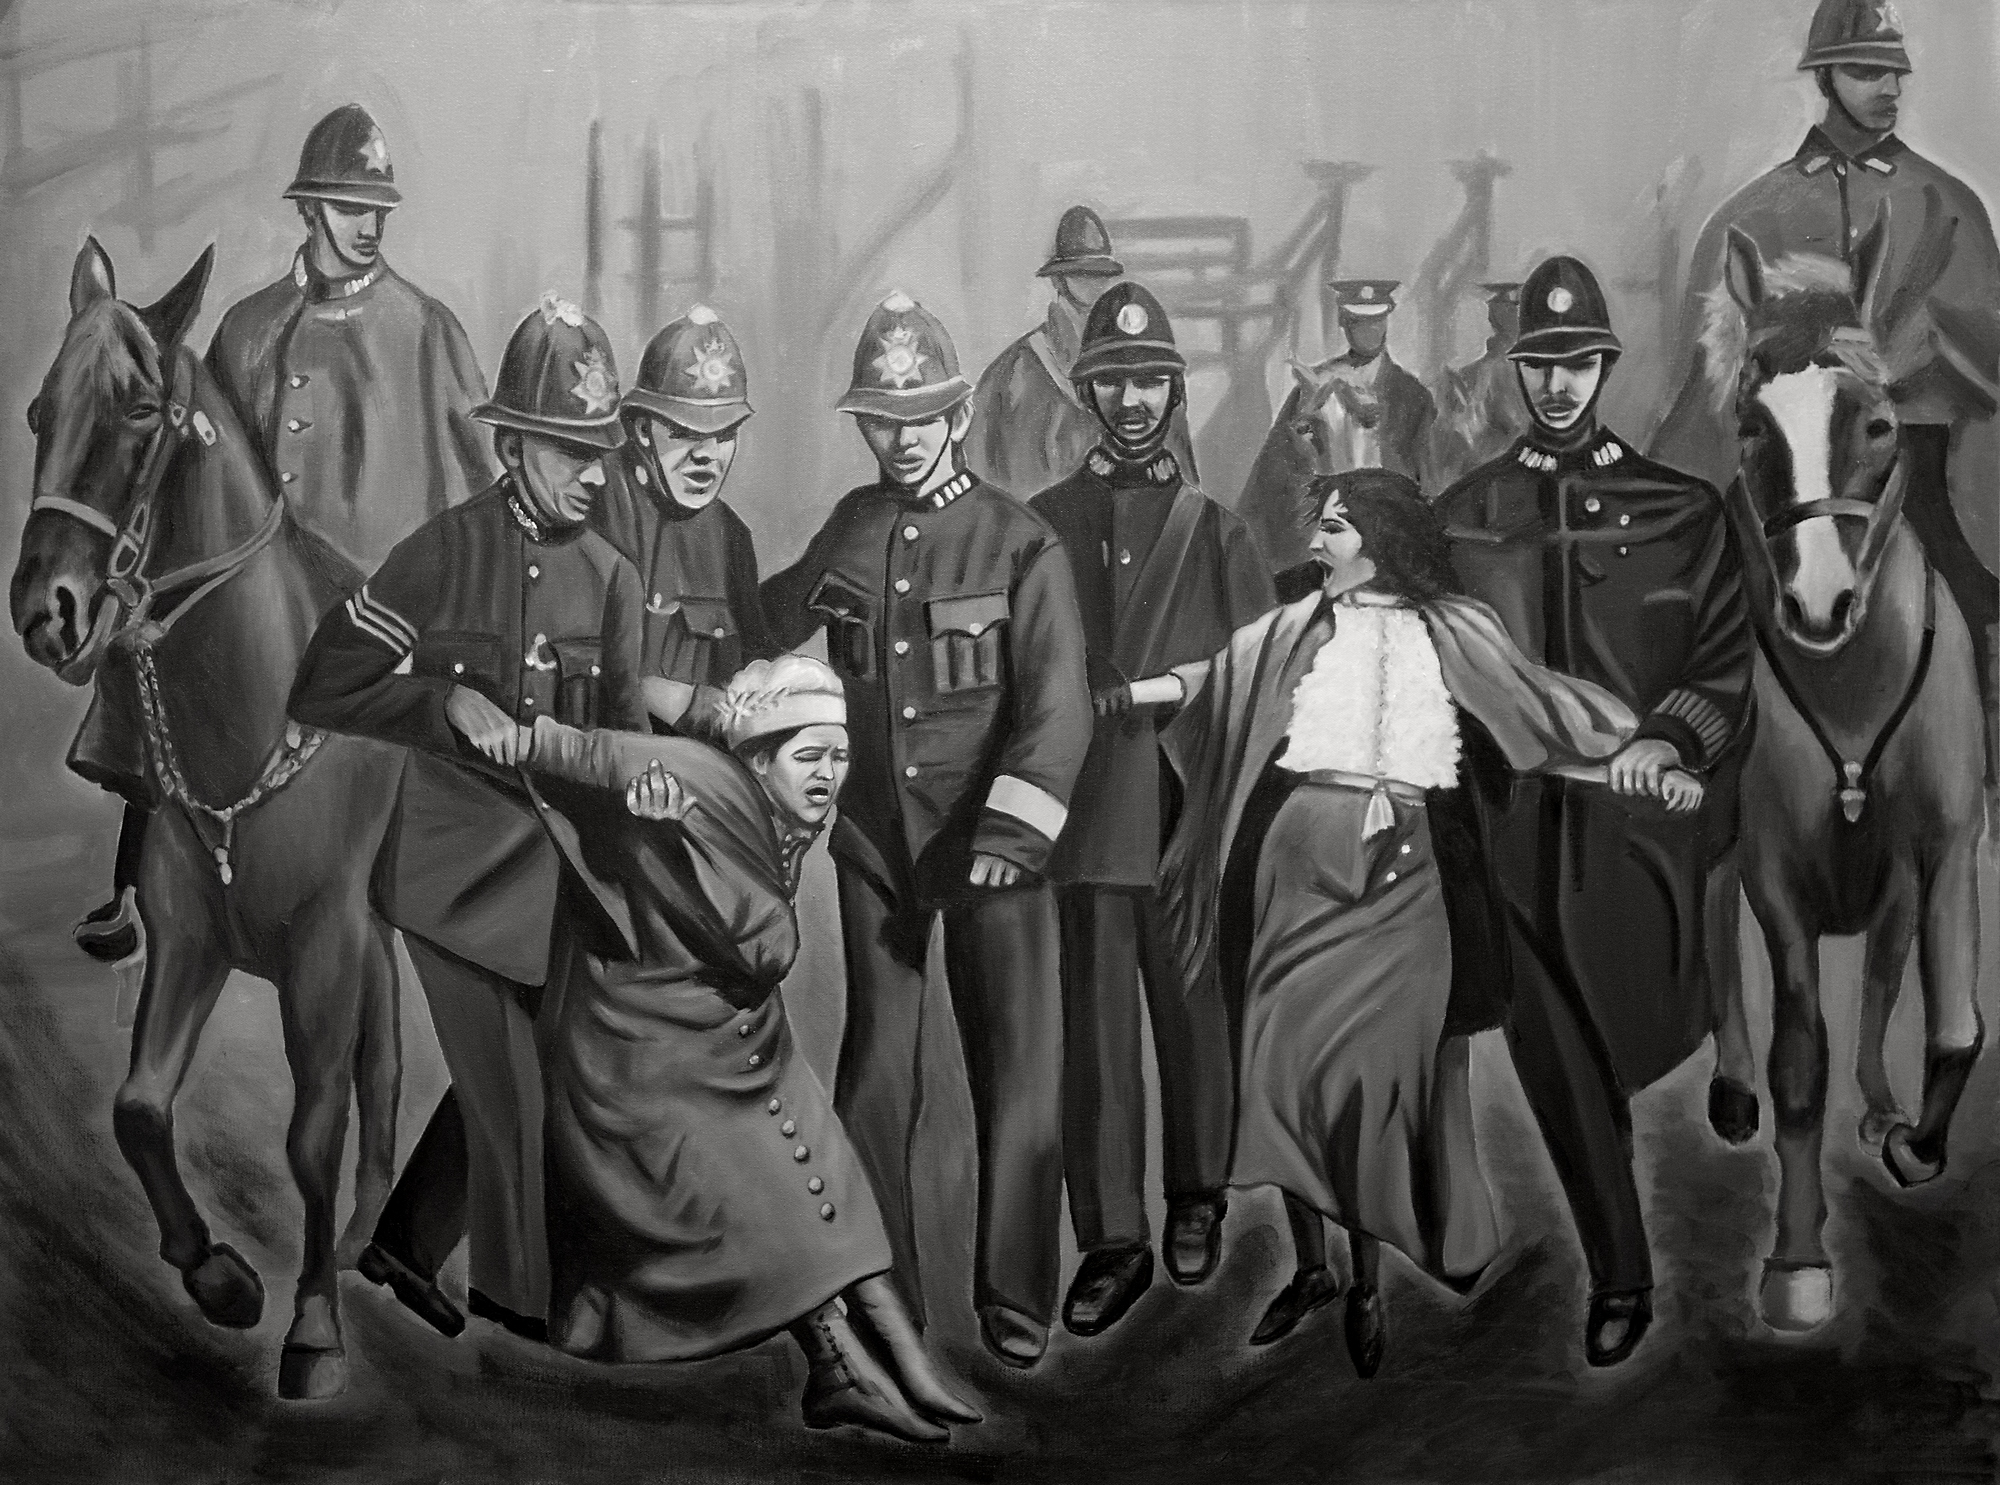 Indira-Cesarine-22Arrested-for-Equality-An-Ode-to-The-Suffragettes22-2017-Oil-on-Canvas-The-Untitled-Space-SHE-INSPIRES-Exhibit-May-2017-V2-1.jpg